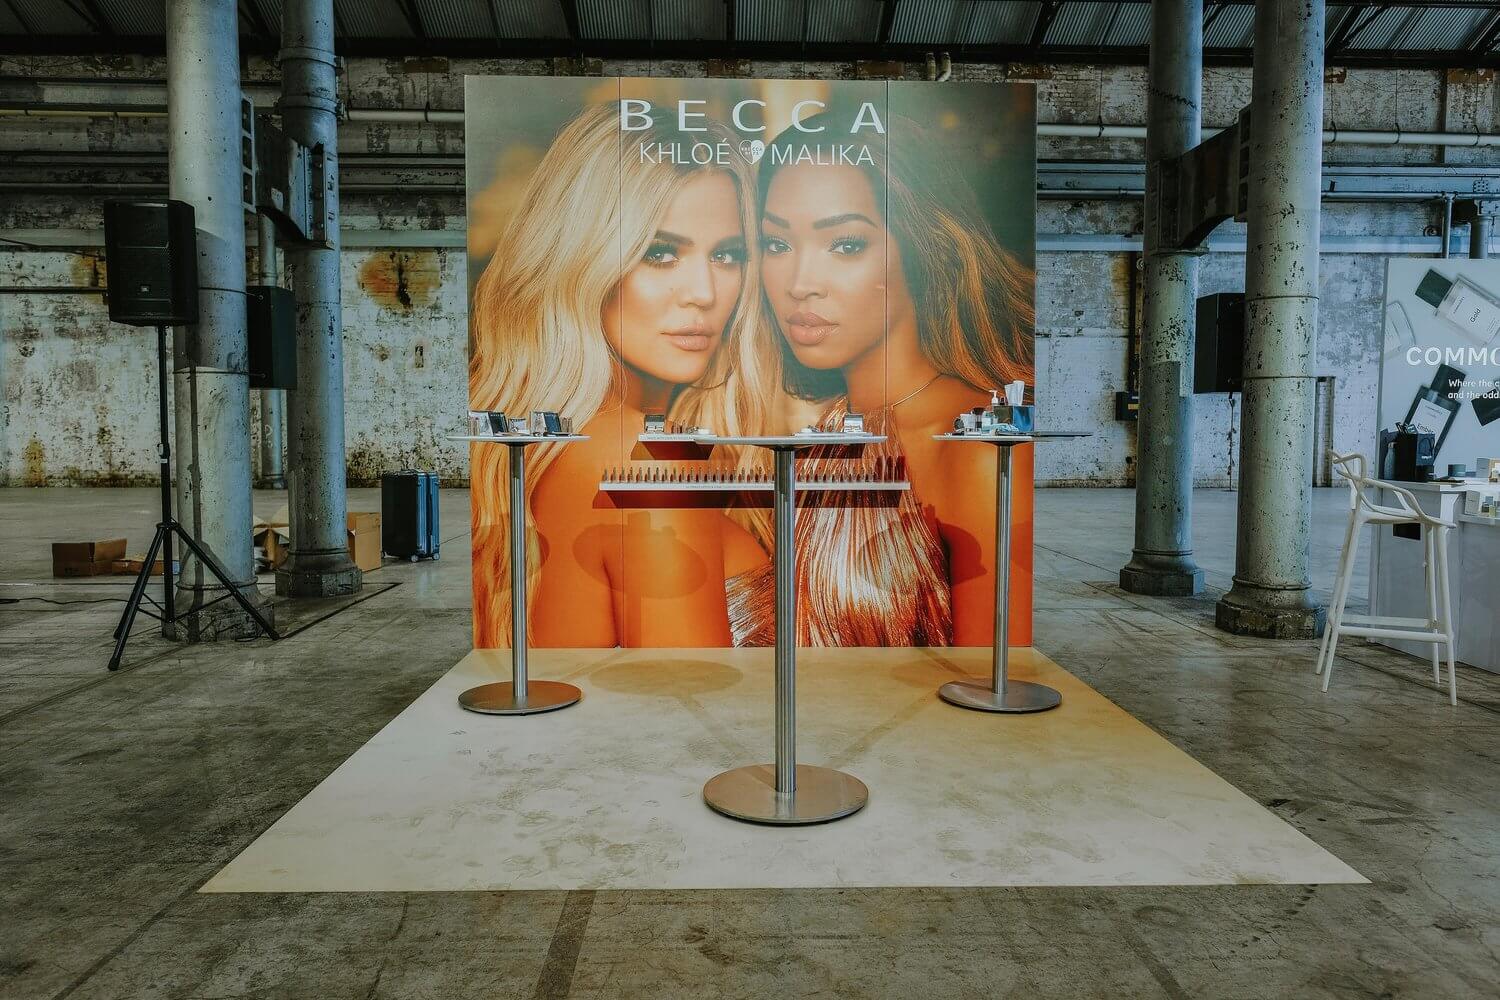 A large display with the faces of Khloe and Malika representing the BECCA Brand, where you can try on their lipstick.